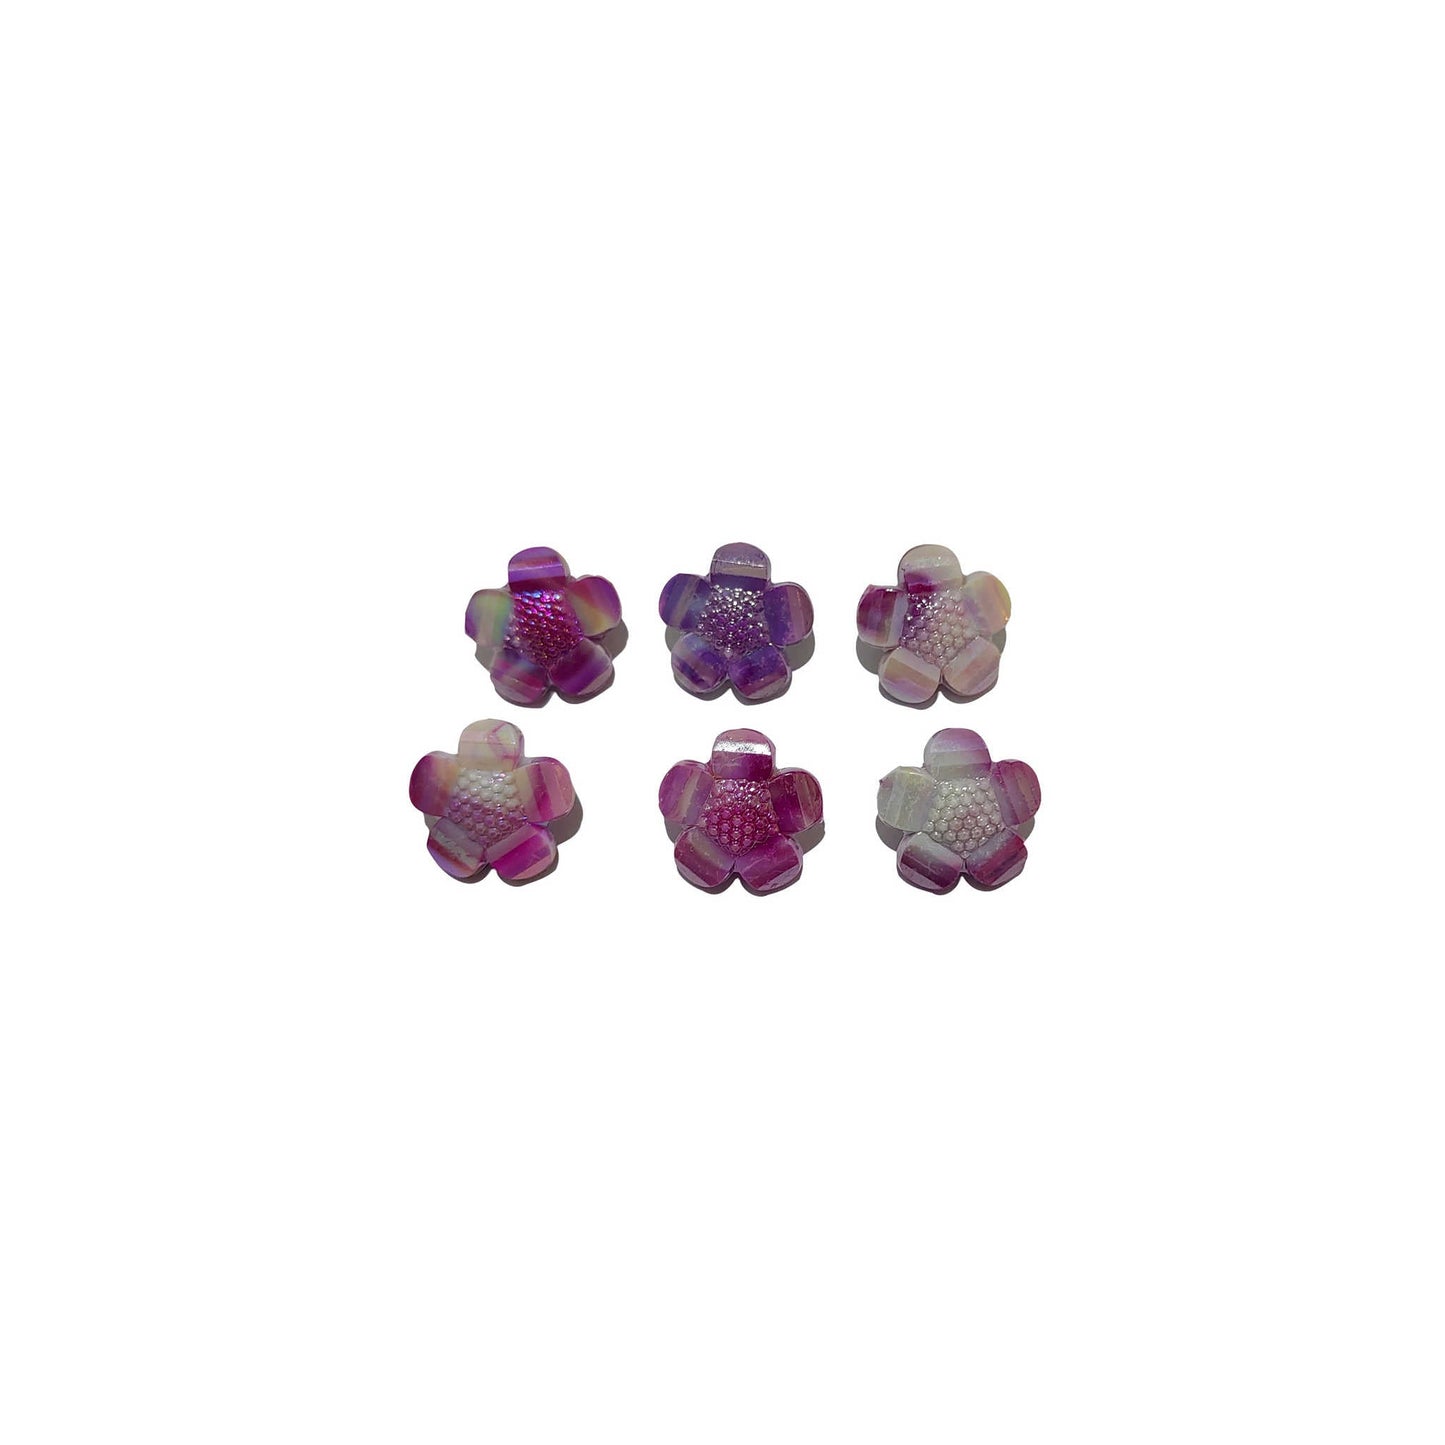 Indian Petals Metallic finish Button Style Beautiful Floral 3D Cabochons Motif for Craft or Decoration - 424, Purple